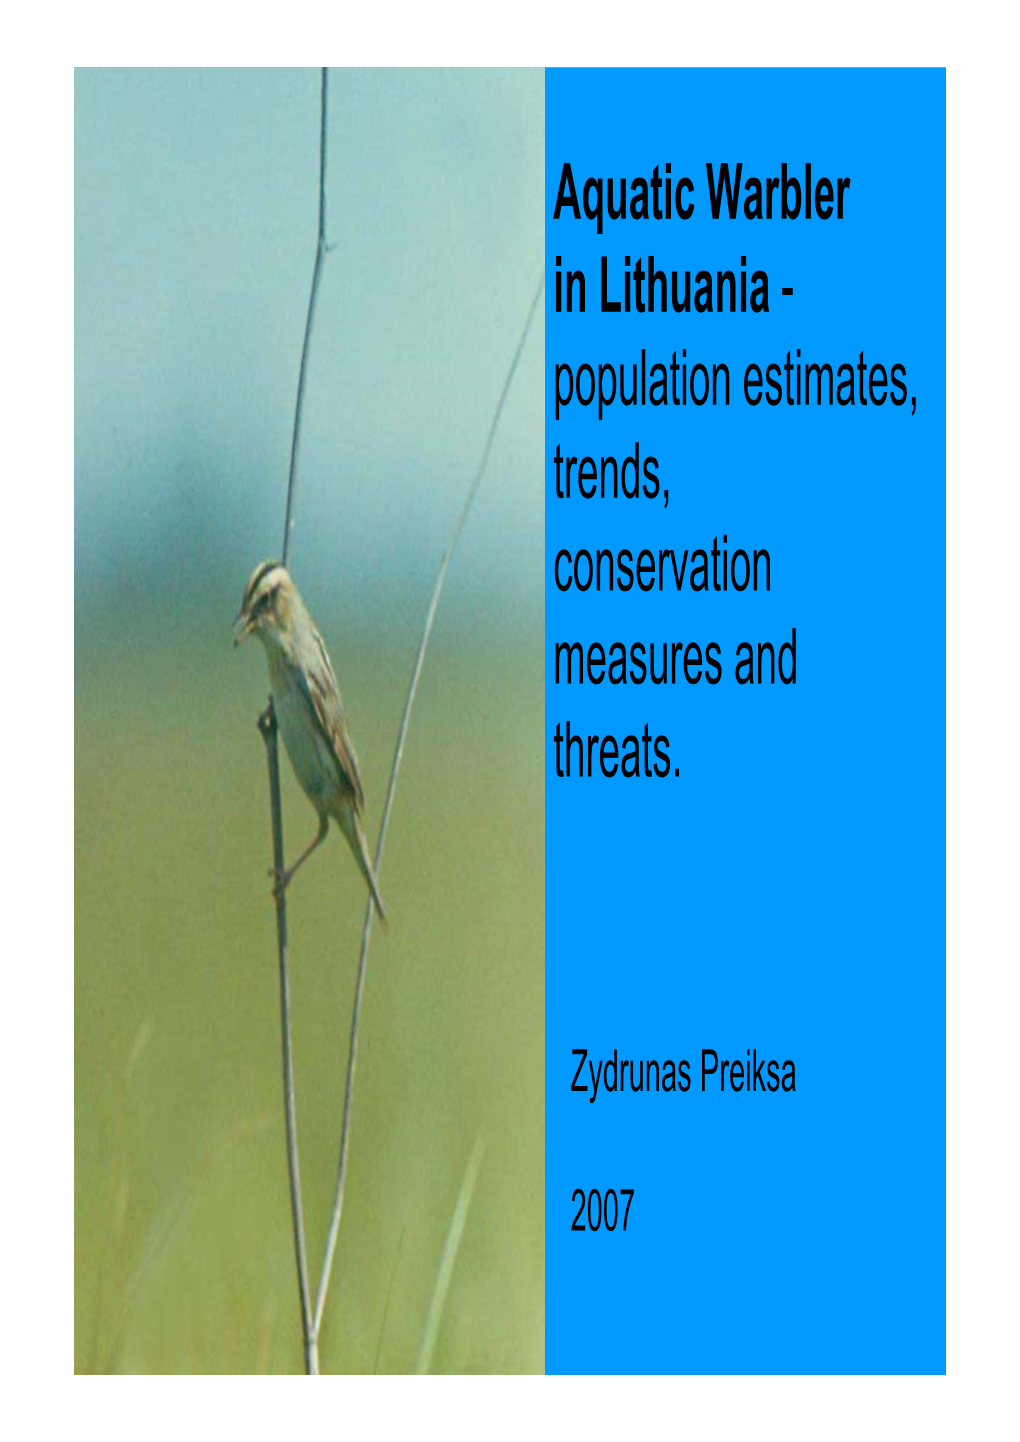 Aquatic Warbler in Lithuania - Population Estimates, Trends, Conservation Measures and Threats